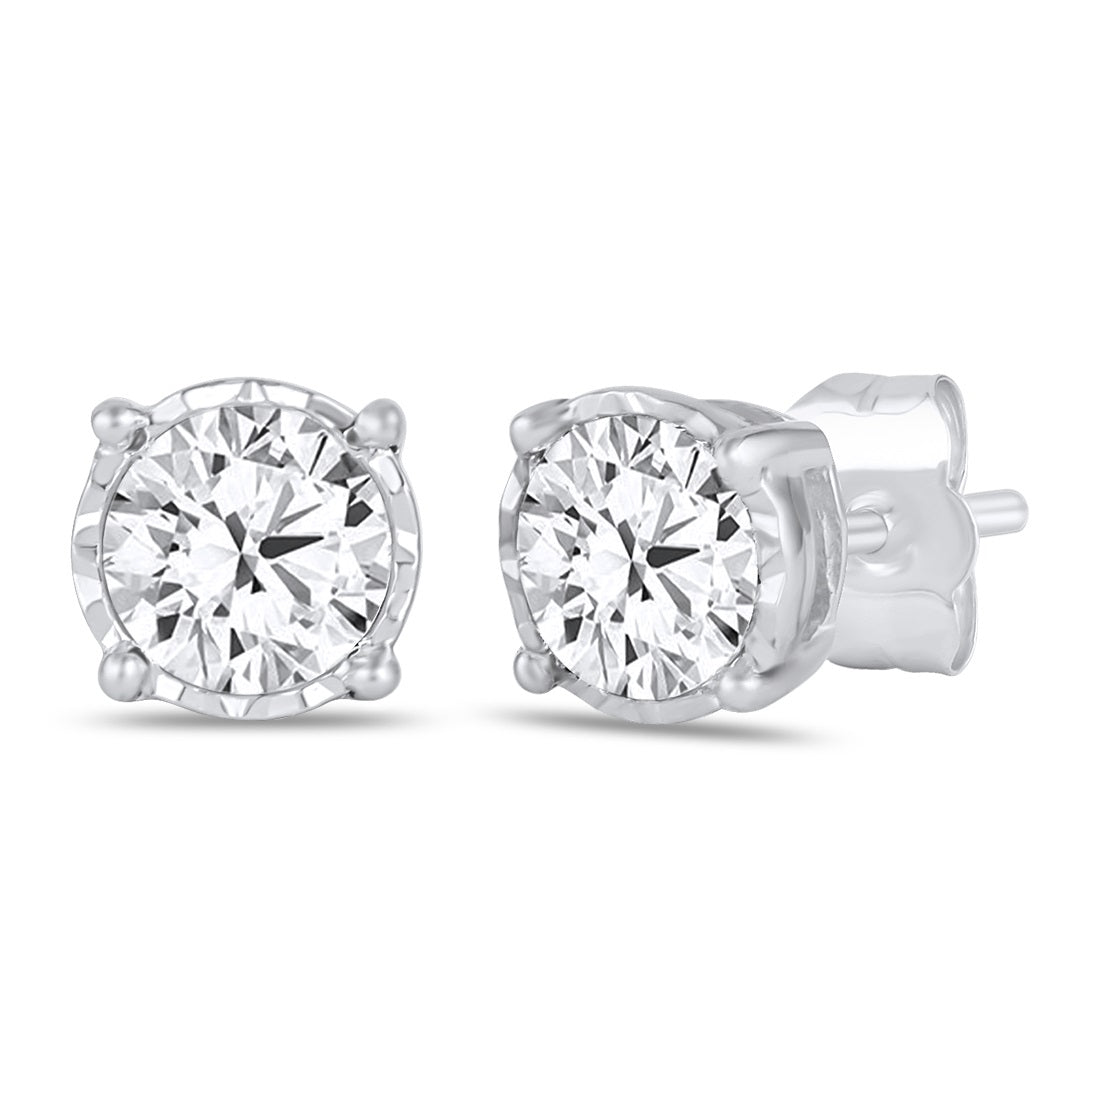 Tia Miracle Halo Stud Earrings with 0.30ct of Diamonds in 9ct White Gold Earrings Bevilles 